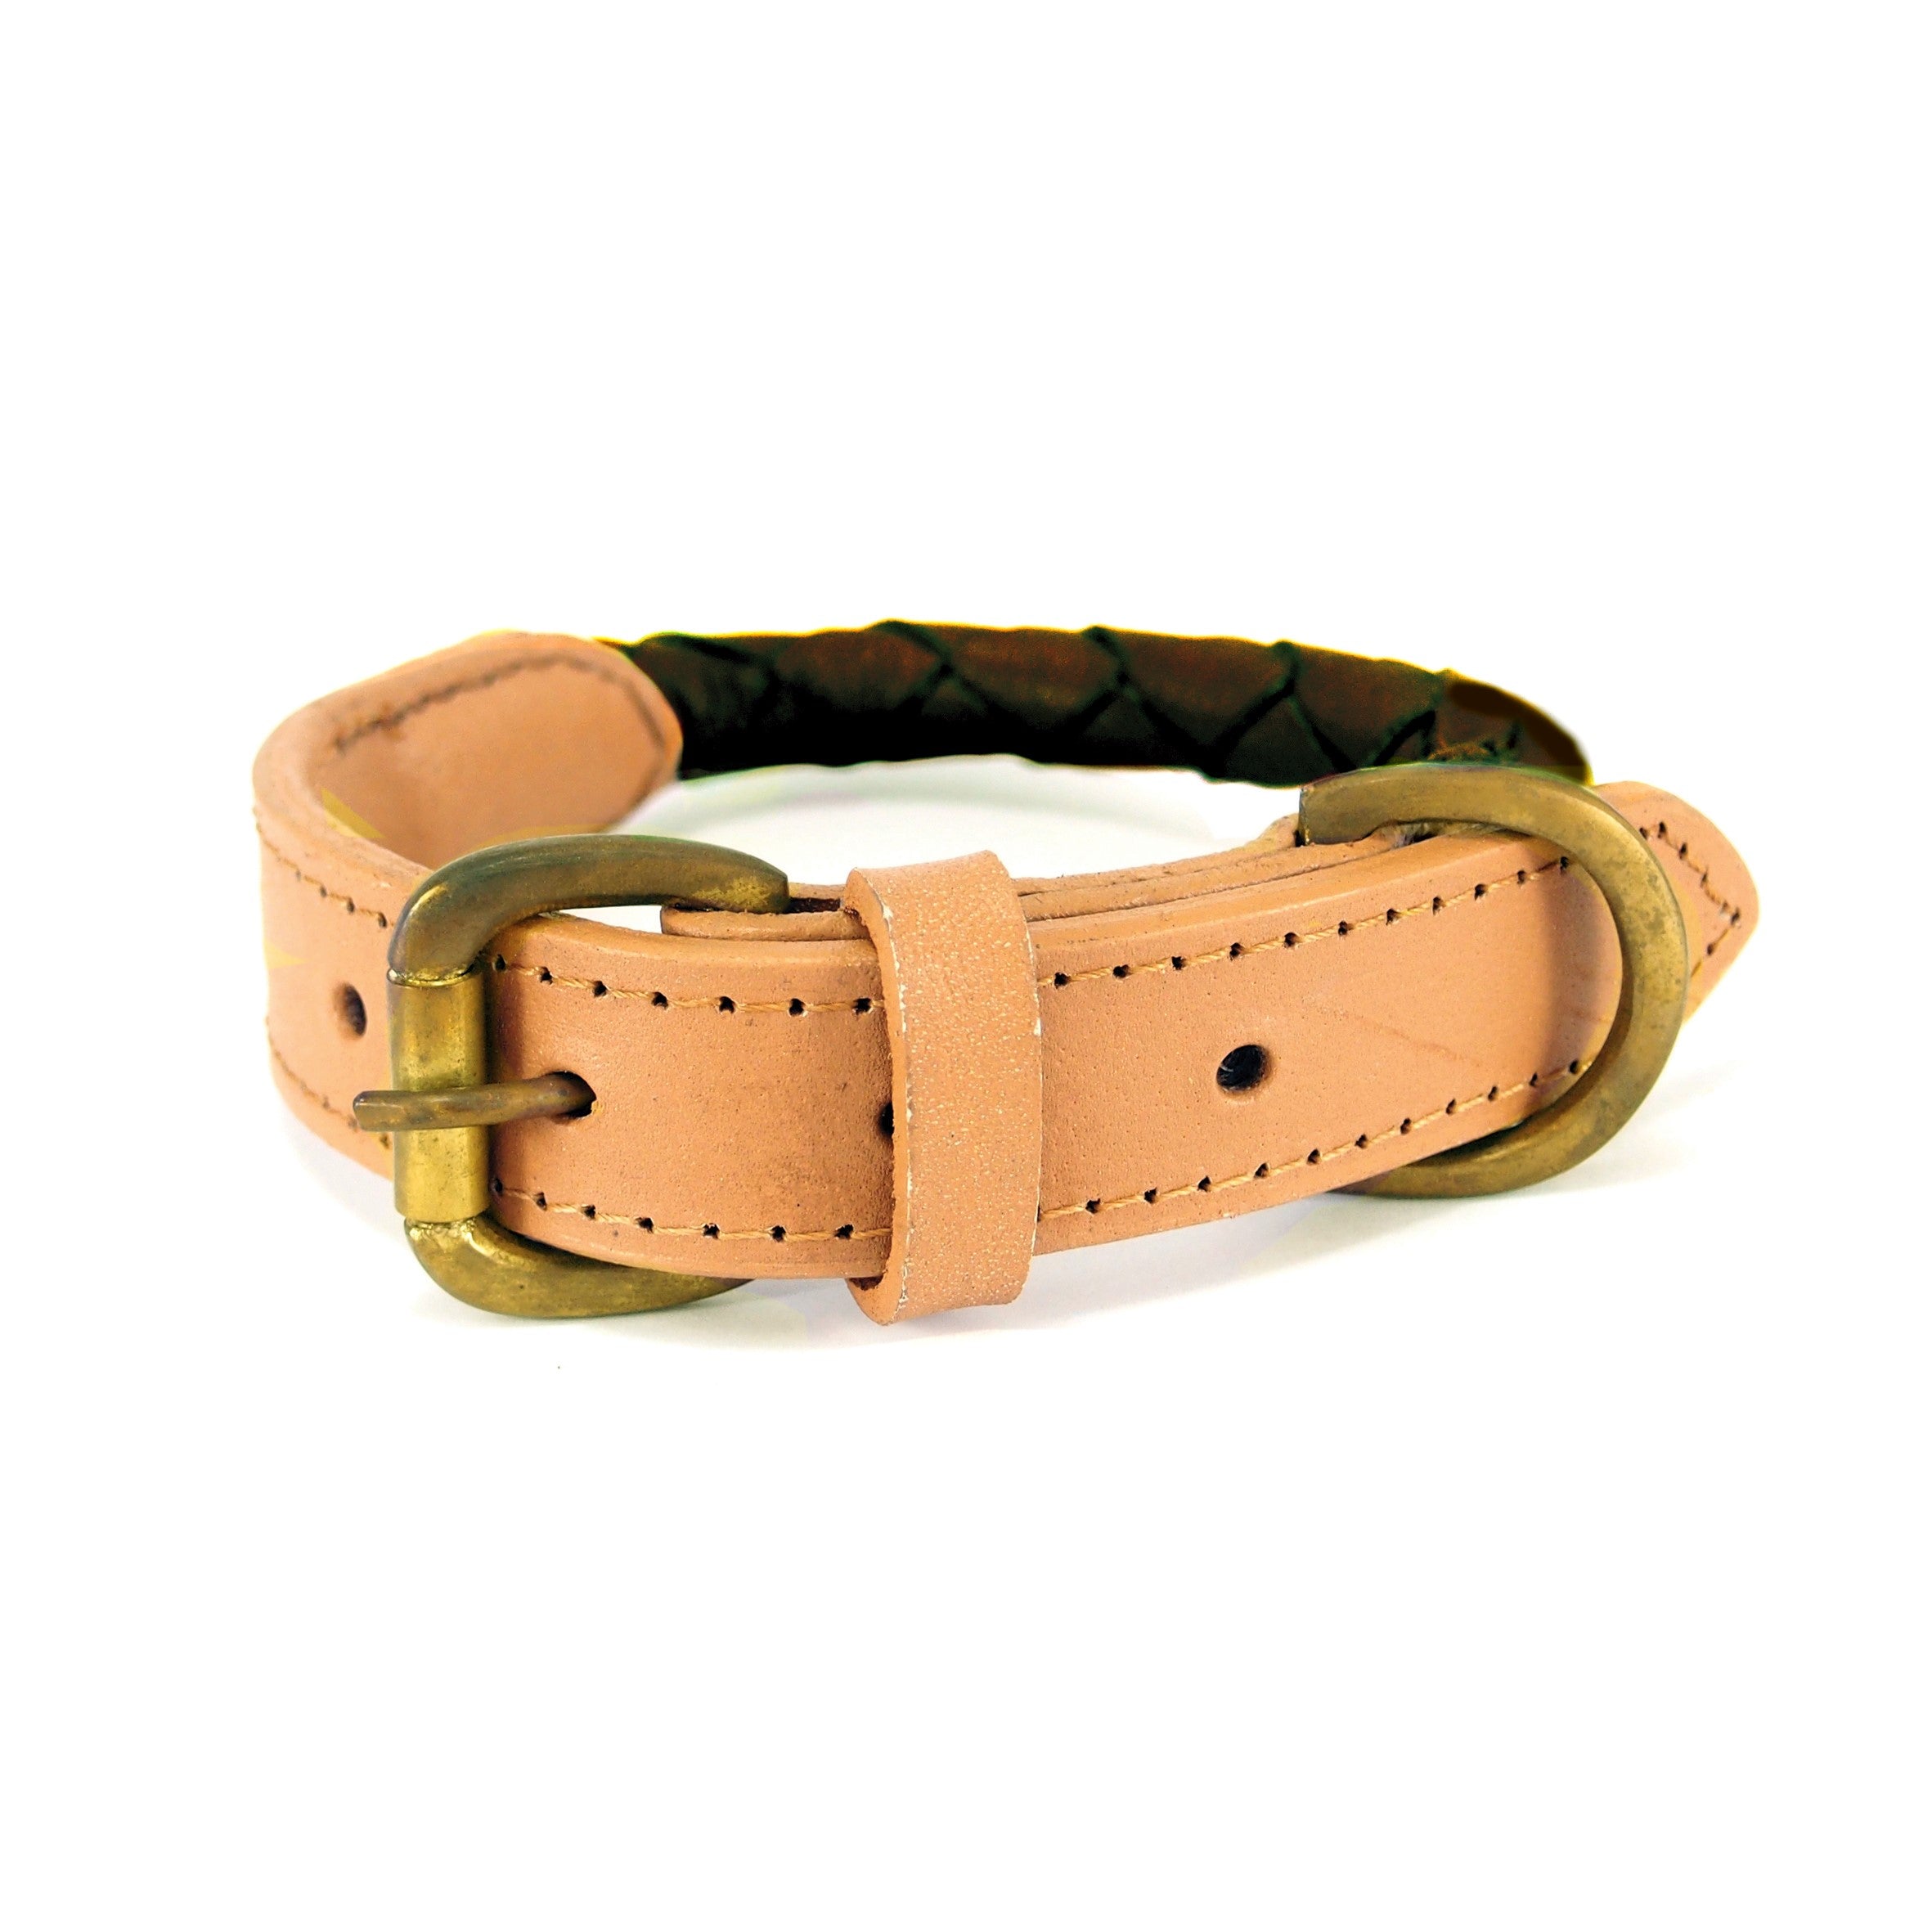 handmade leather round braided dog collar.  Strong, sustainable and compostable brown Buffalo Leather with natural colour trim.  Aged brass buckle